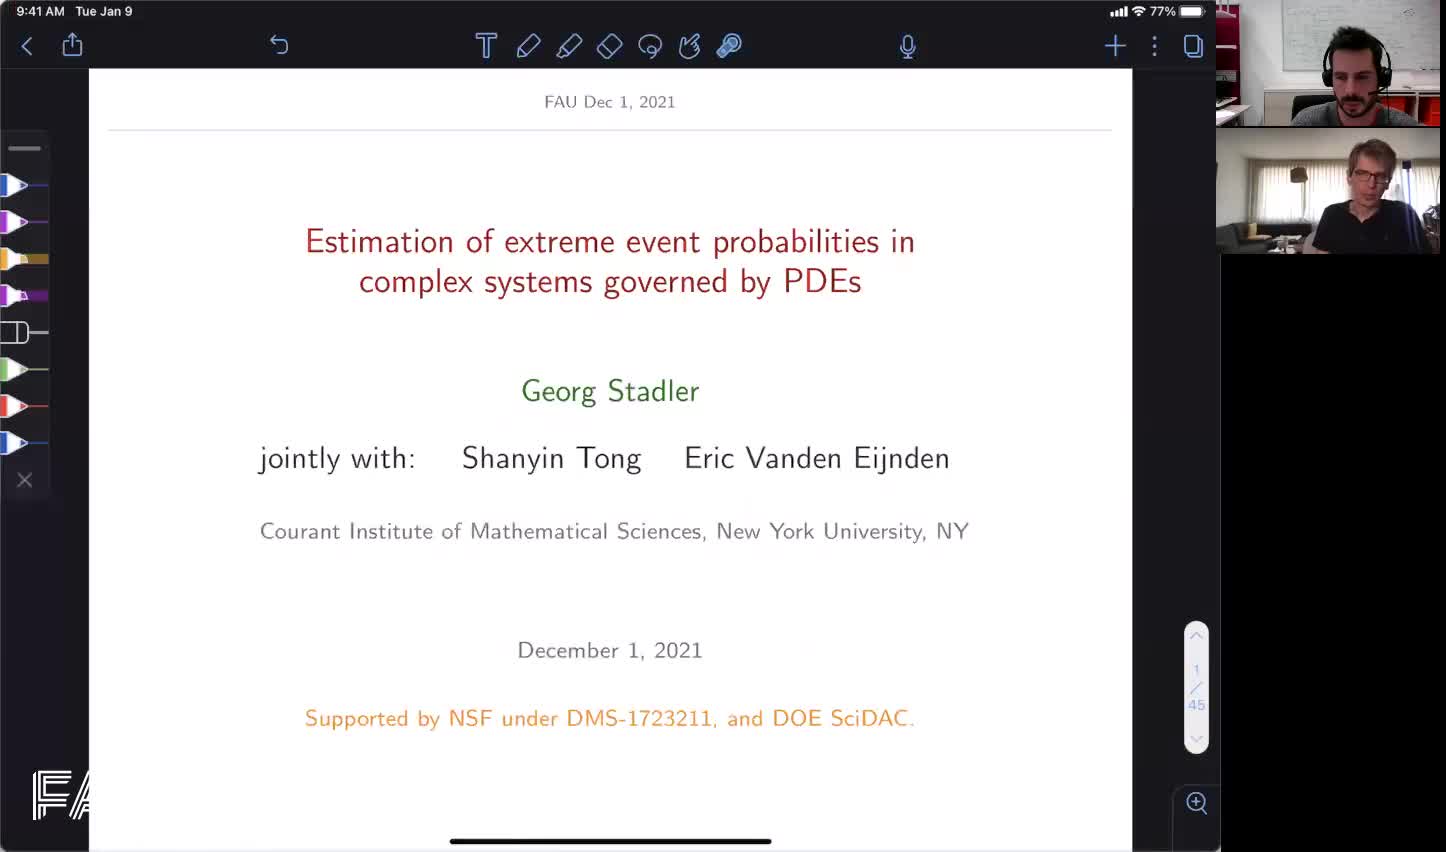 Estimation of extreme event probabilities in systems governed by PDEs (G. Stadler, Courant Institute, NYU) preview image